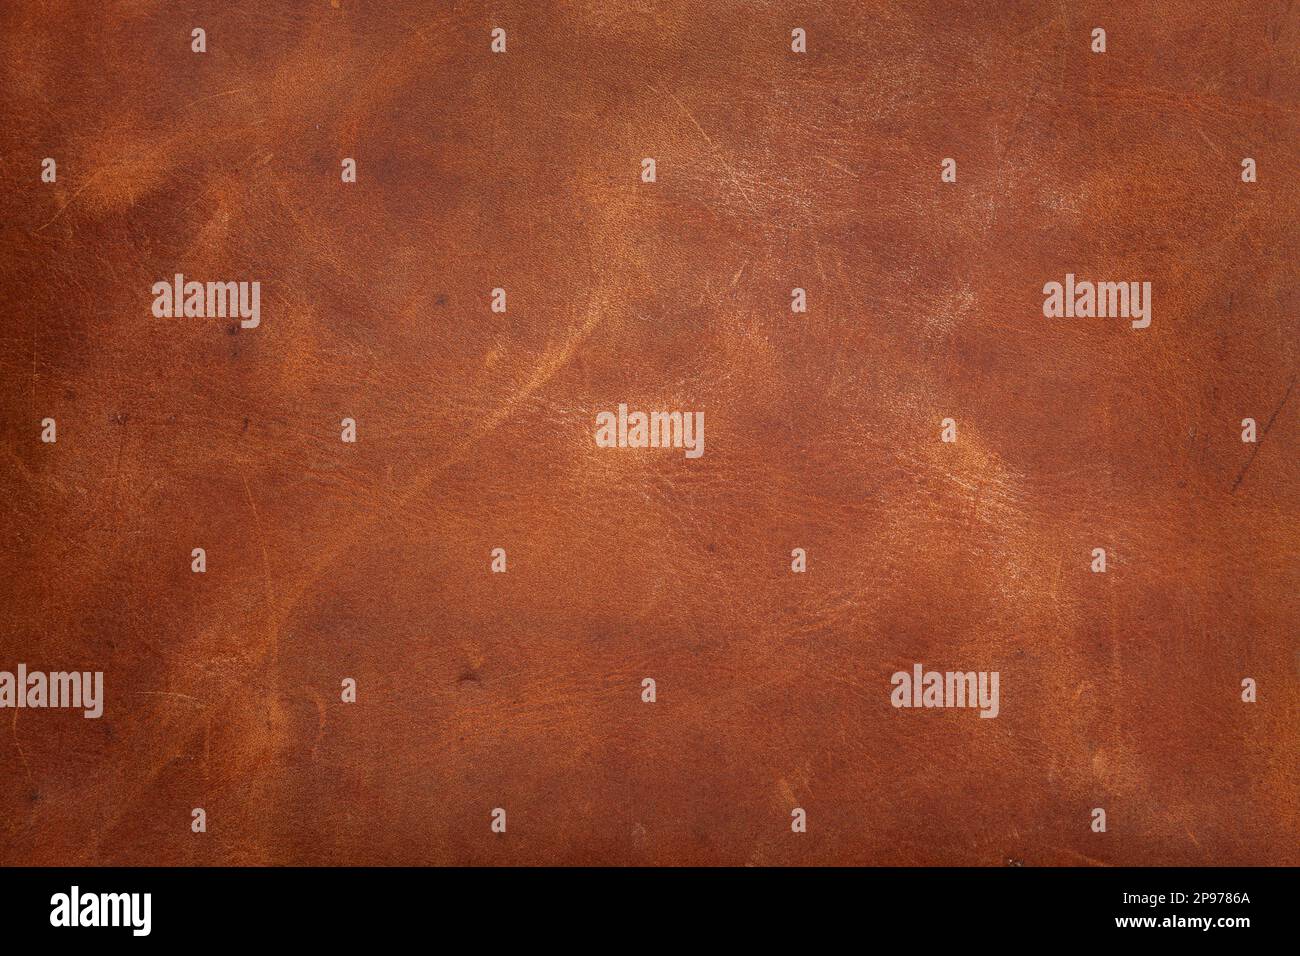 Brown leather texture background from a pair of chaps Stock Photo